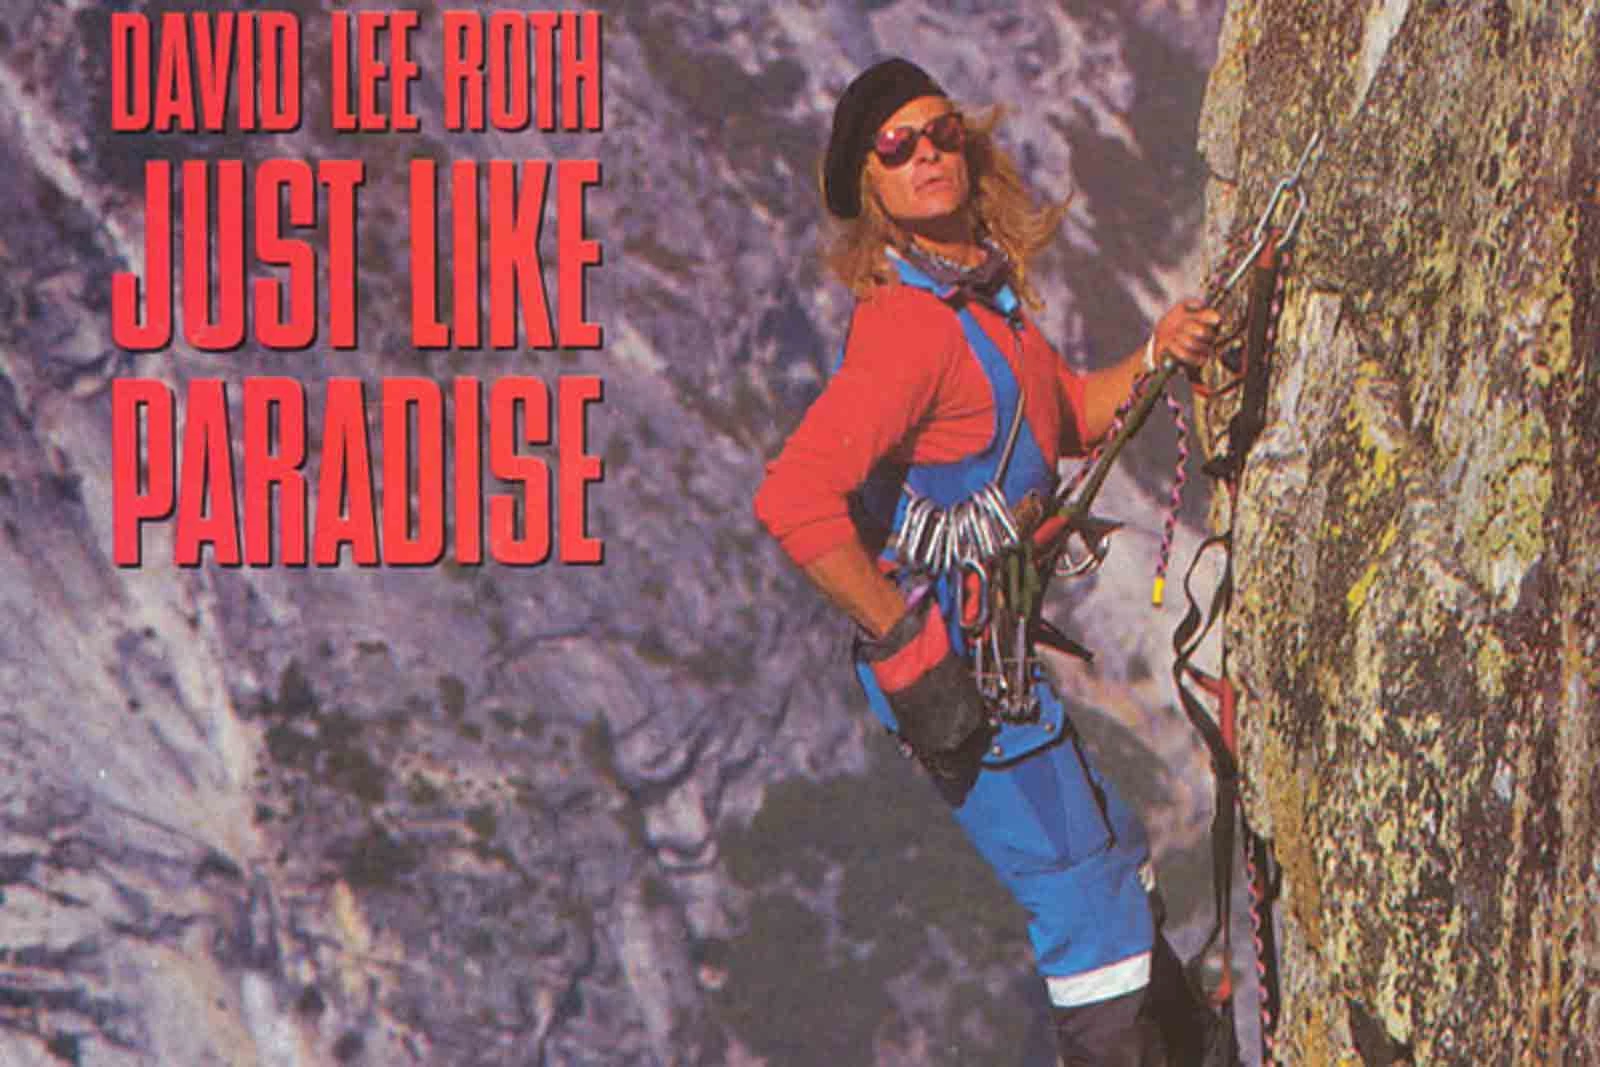 When David Lee Roth Scaled the Heights With 'Just Like Paradise'